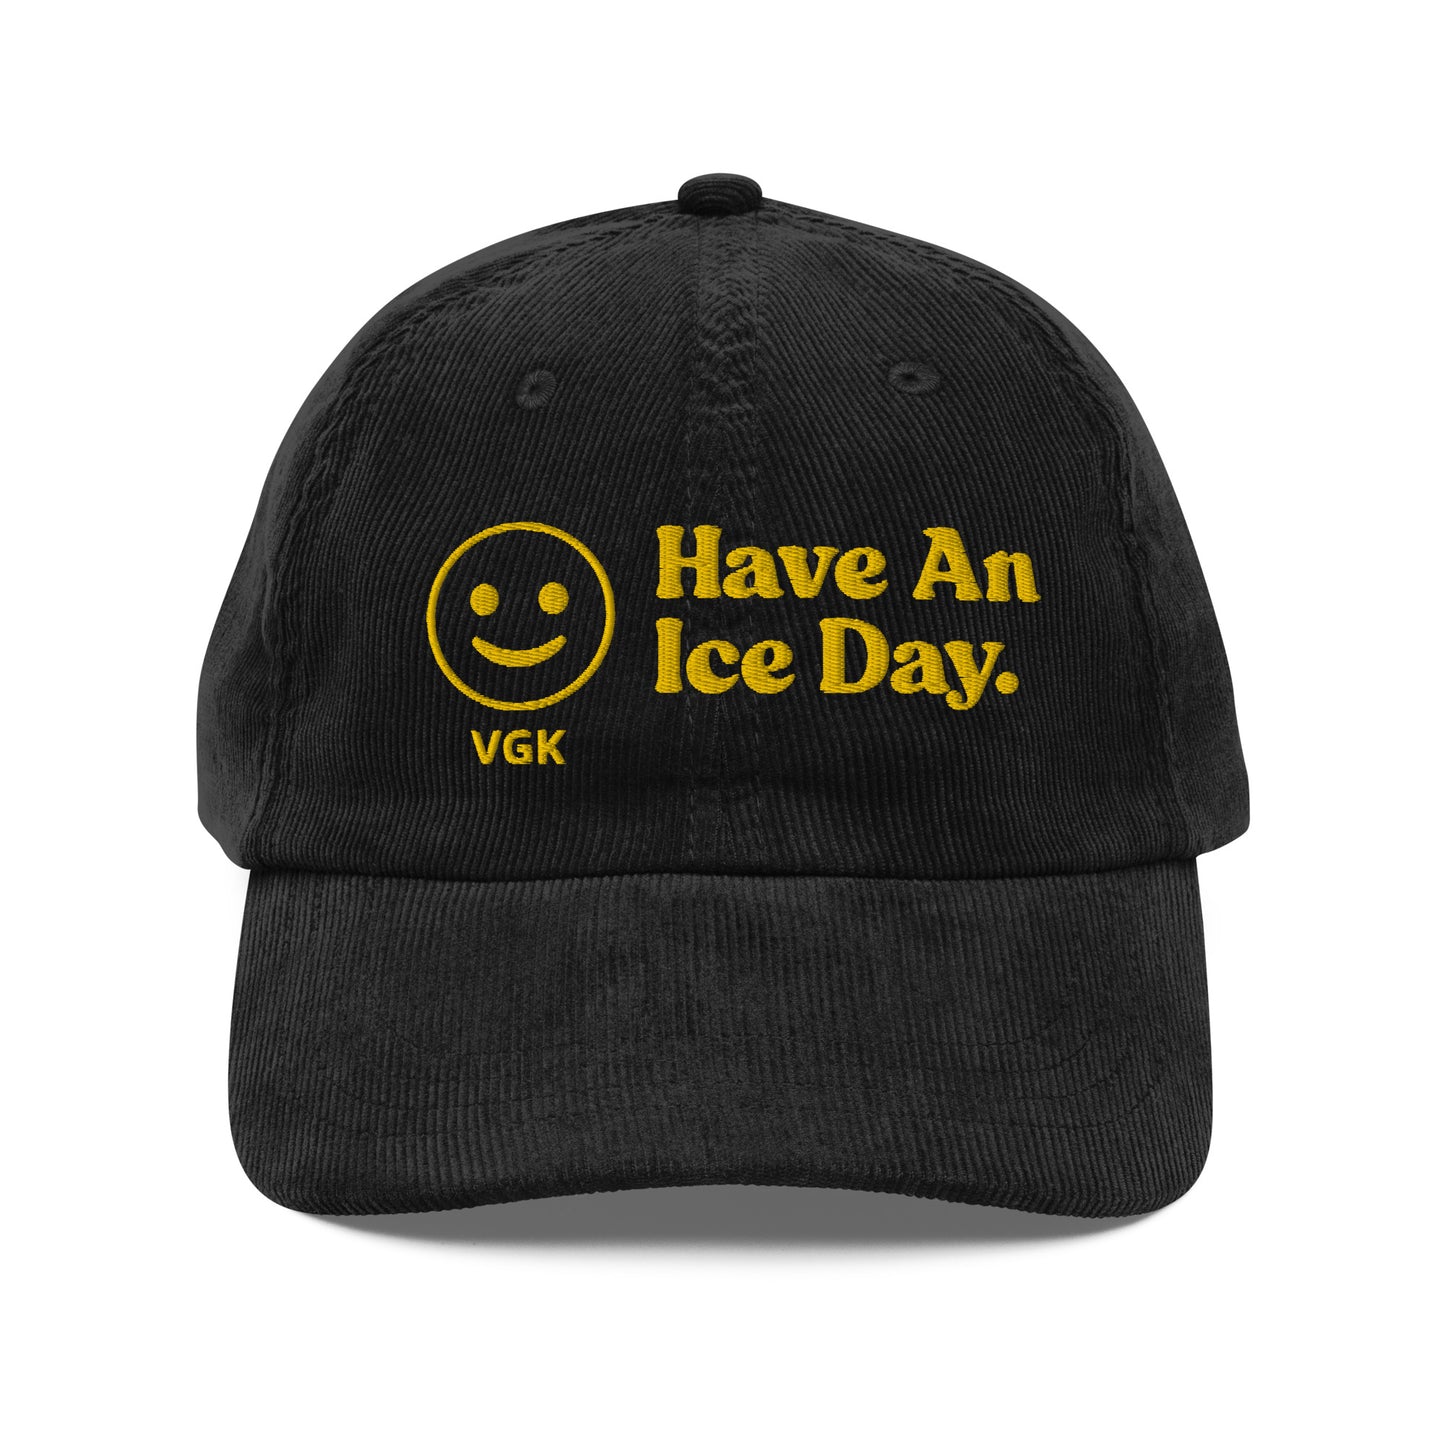 Have An Ice Day VGK Smiley Face Embroidered Vintage corduroy cap